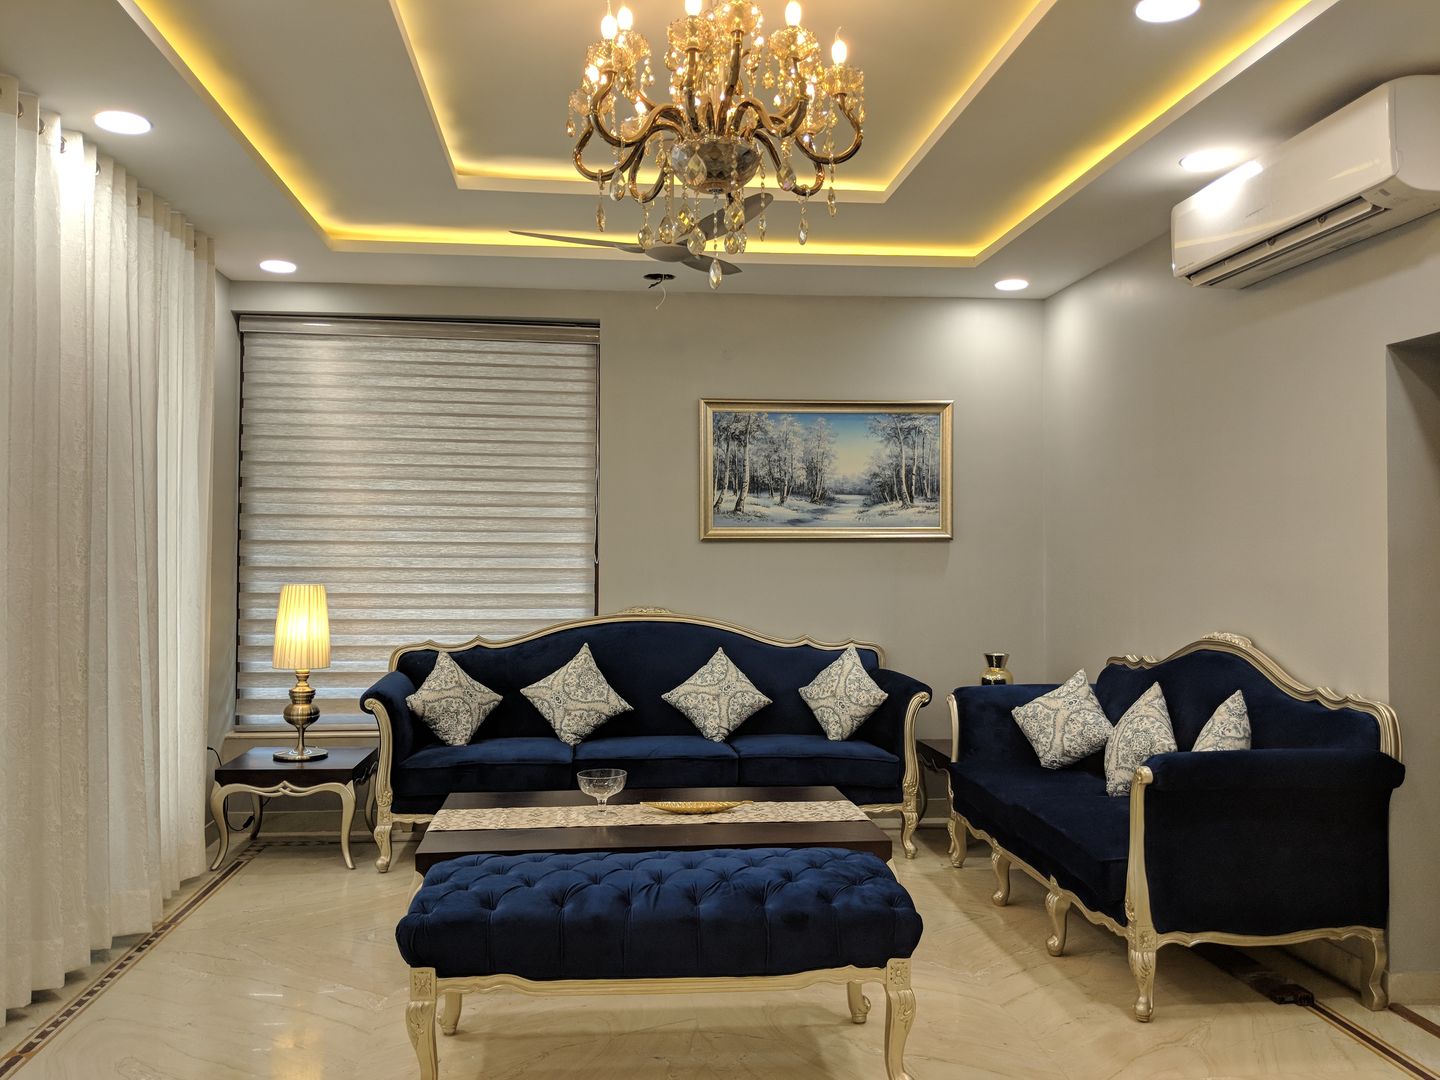 living room ceiling design furniture placement and wall design - GharExpert